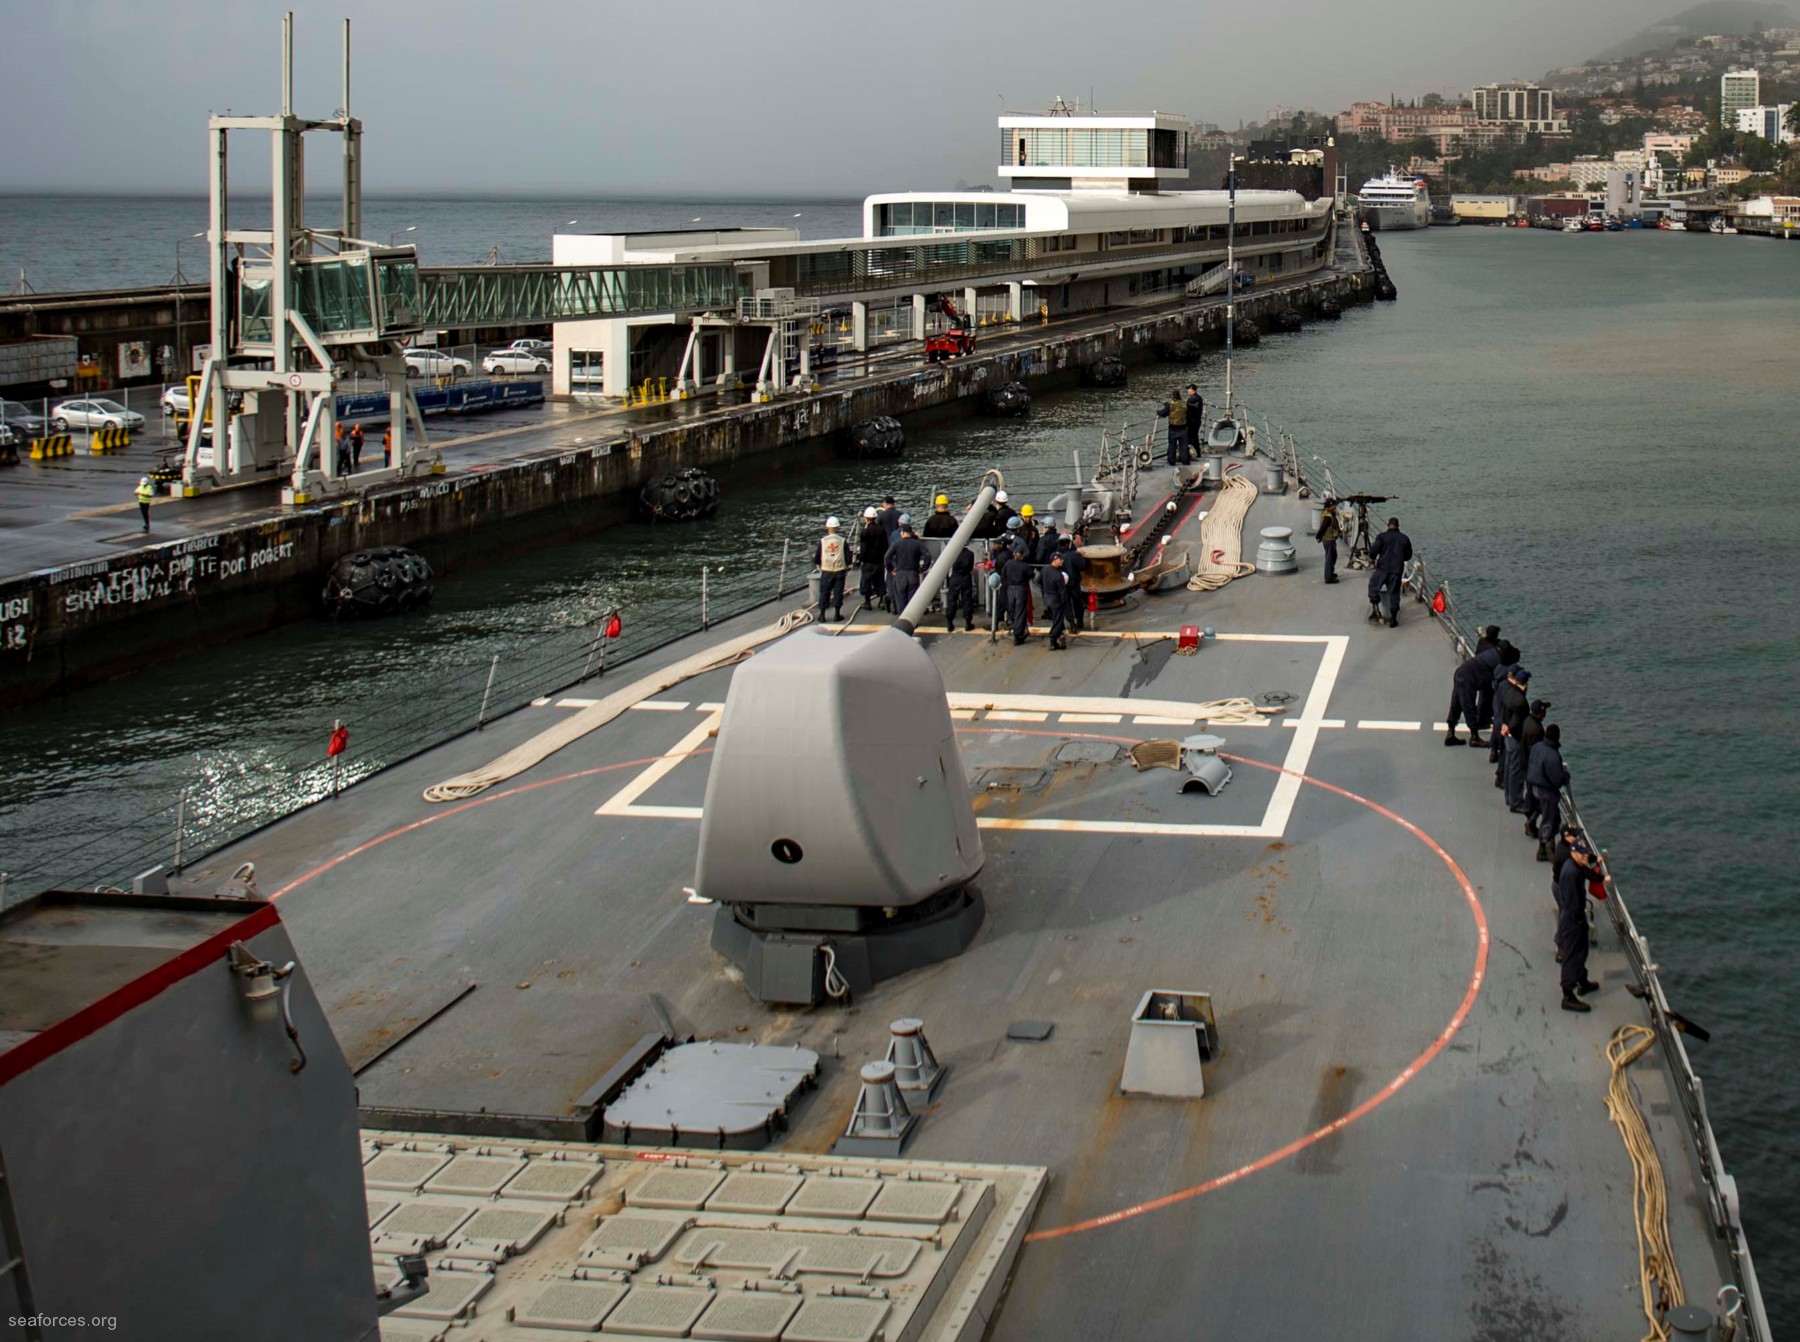 ddg-55 uss stout guided missile destroyer us navy 04 funchal madeira portugal